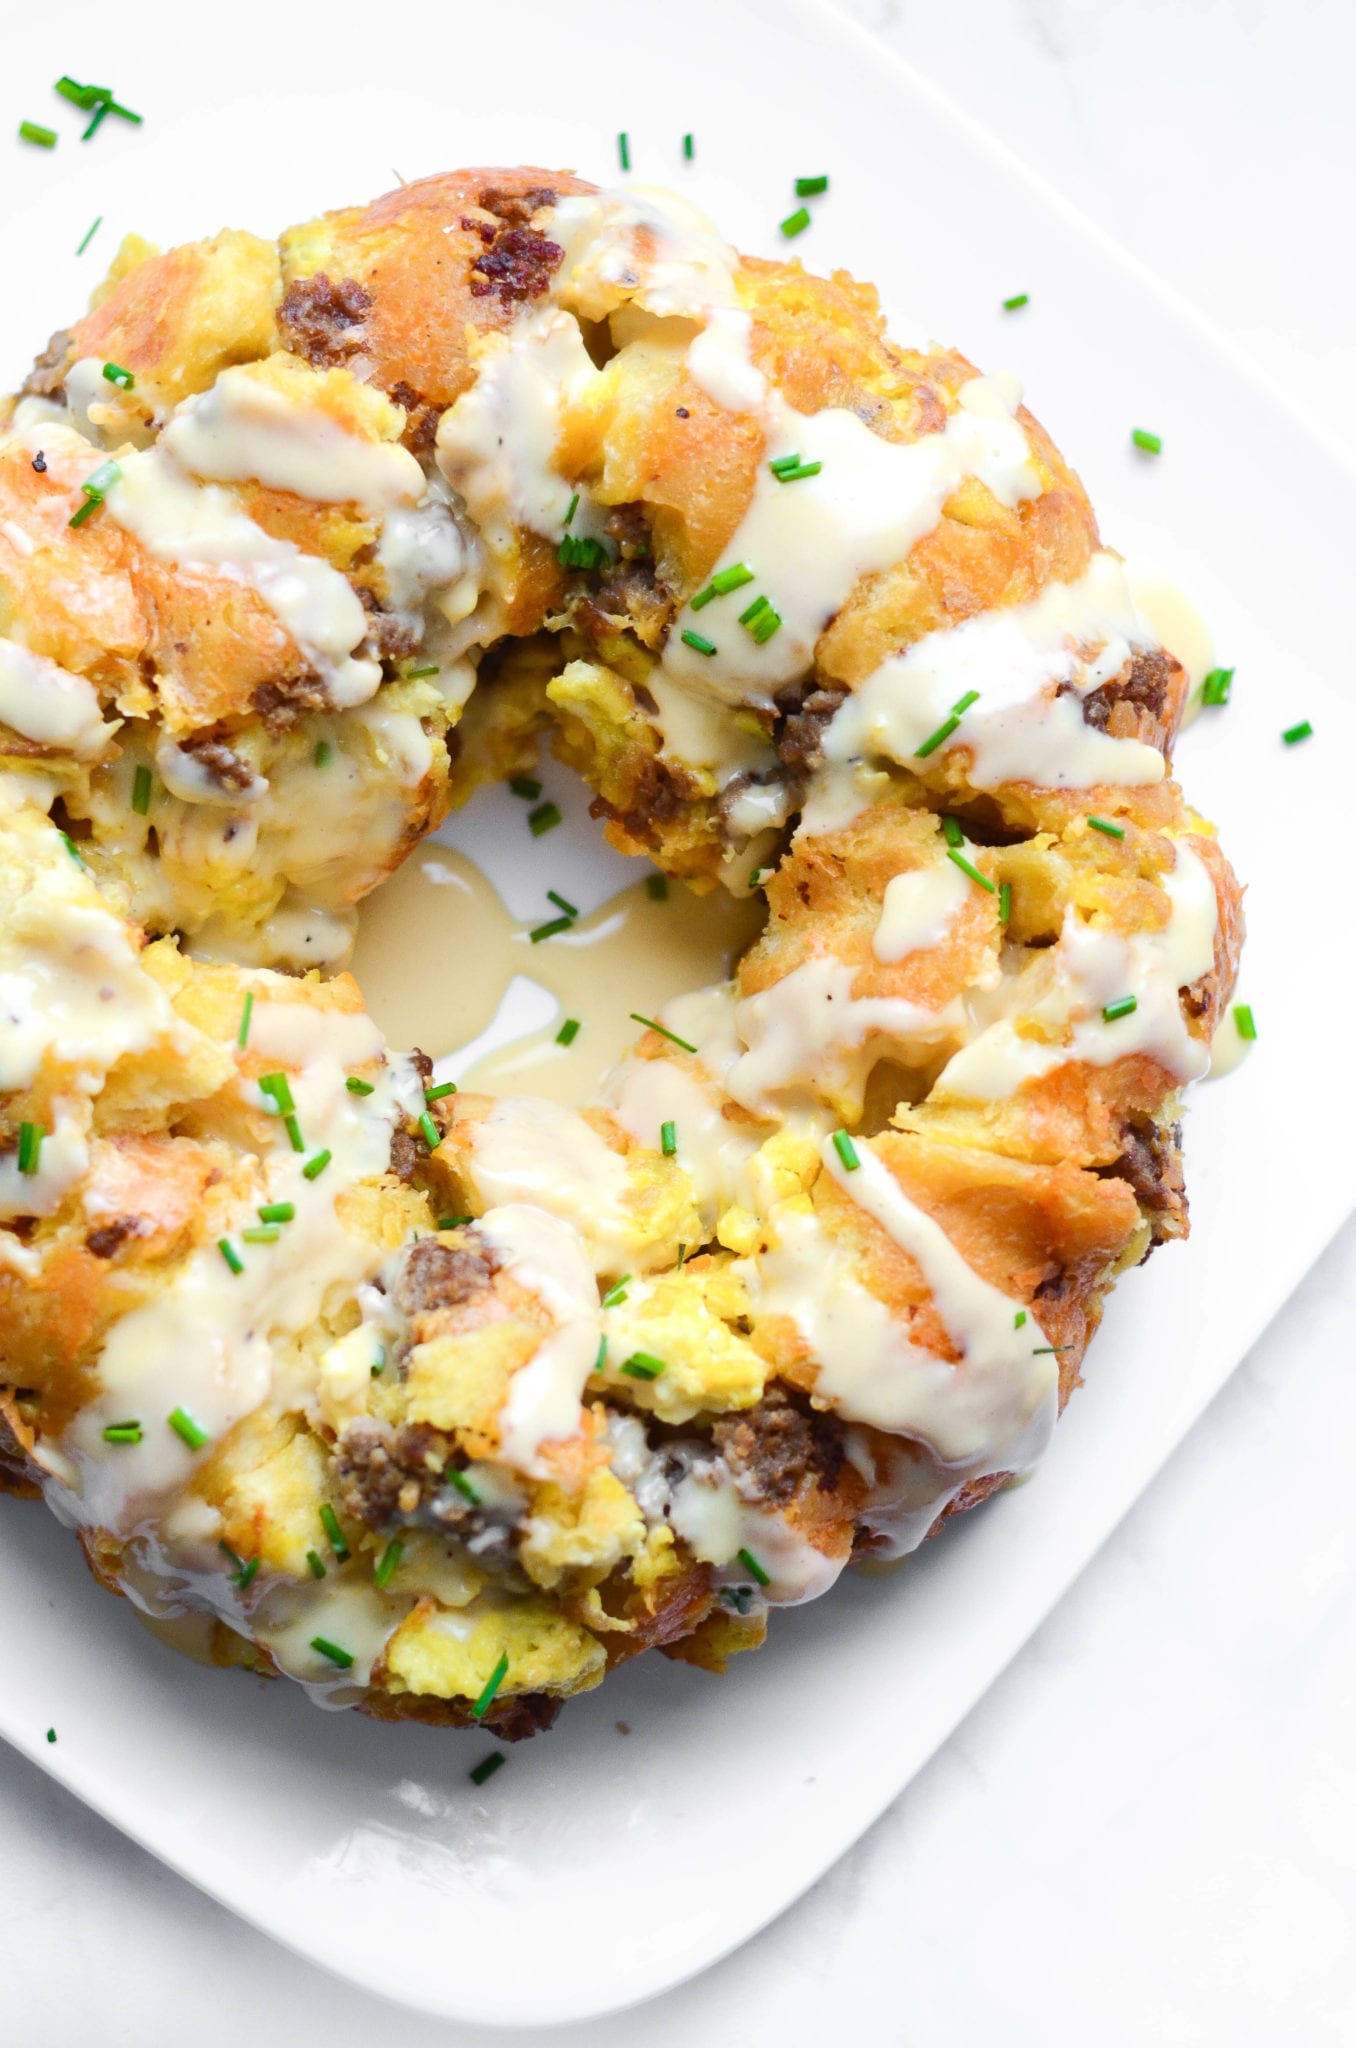 Cheesy Breakfast Monkey Bread With Sausage and Egg